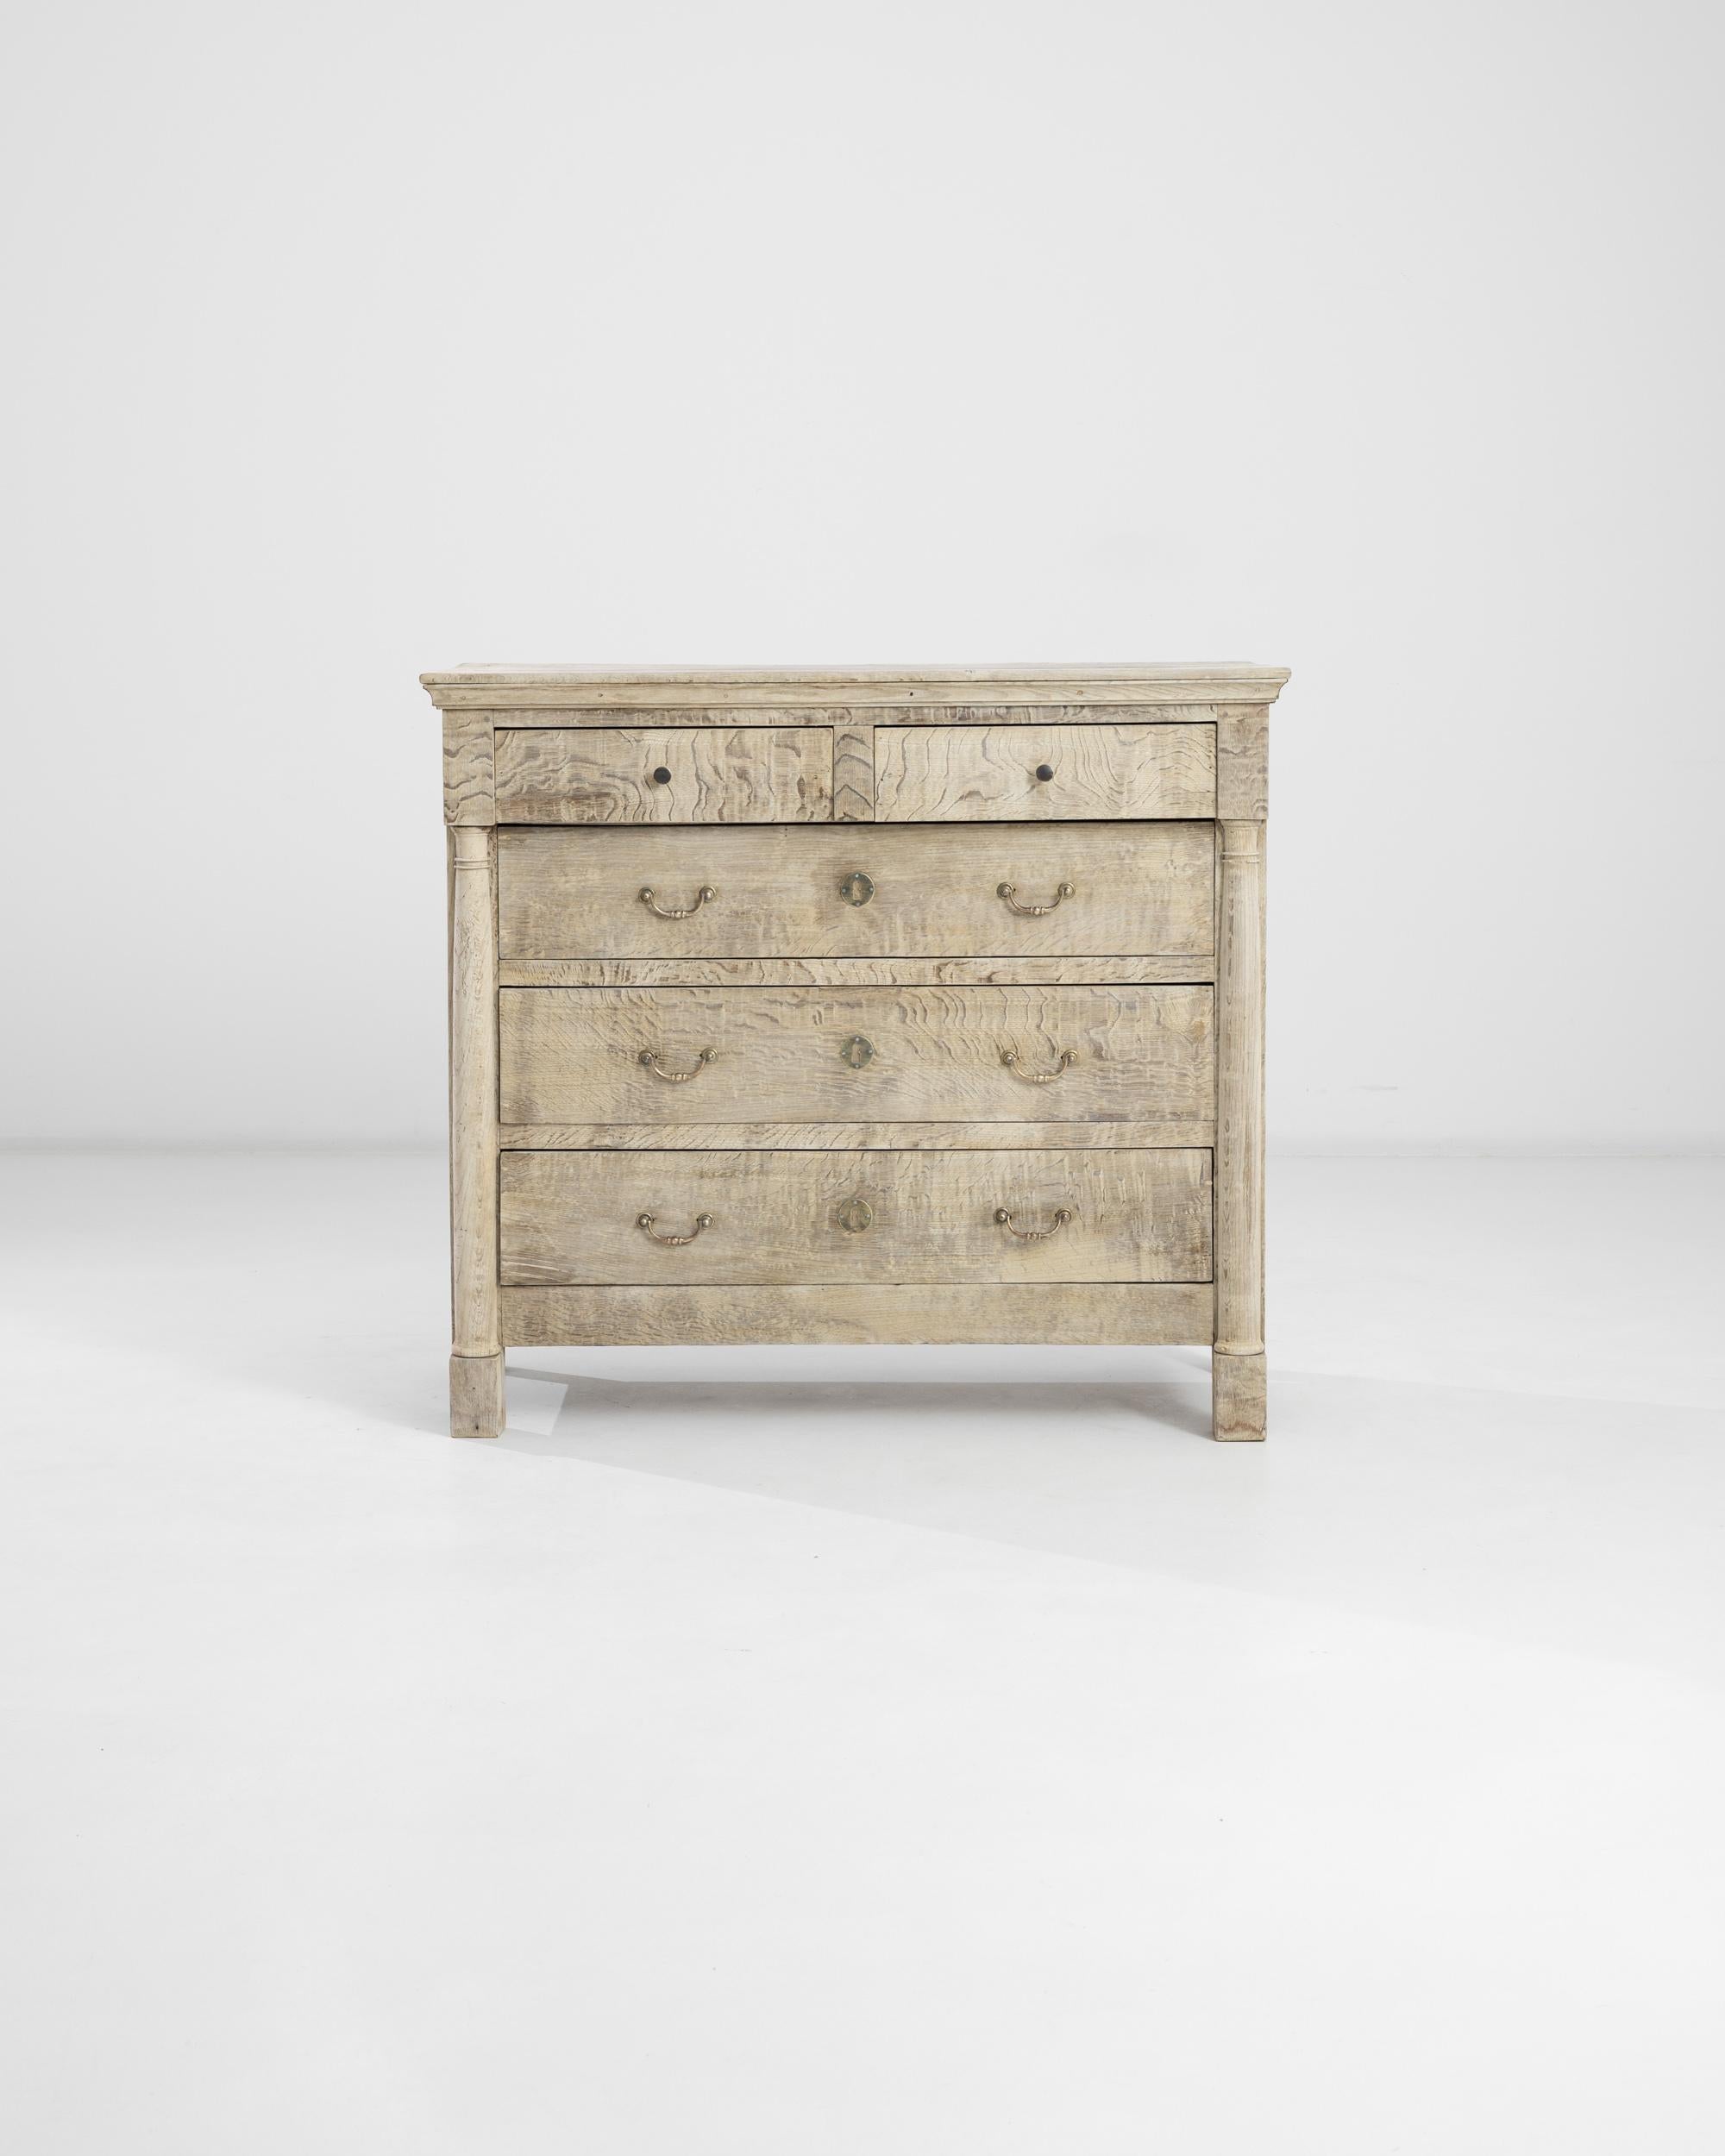 Built in France circa 1900, this vintage oak chest of drawers presents a simple yet refined constitution: two shallow drawers rest atop three ample compartments adorned by gilded bail pulls and decorative locks. Neoclassical elements such as a